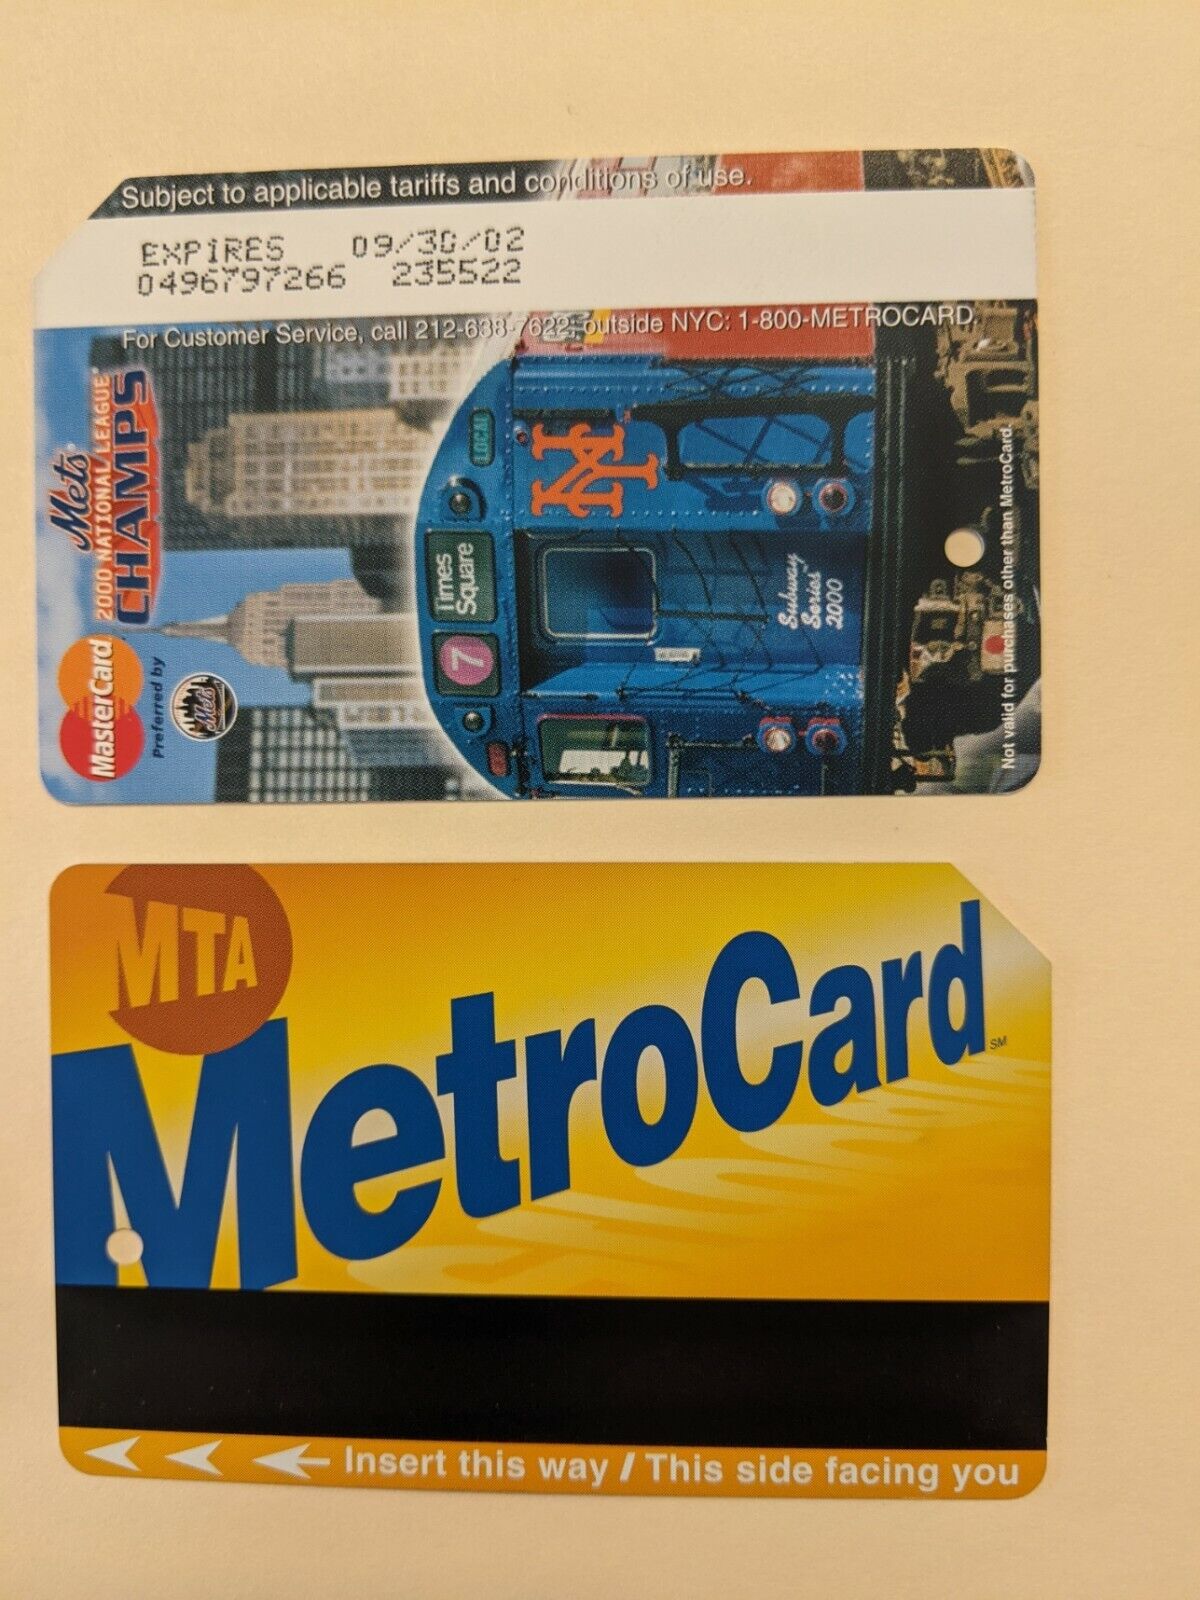 METS Subway Series NYC MetroCard, Expired-Mint condition